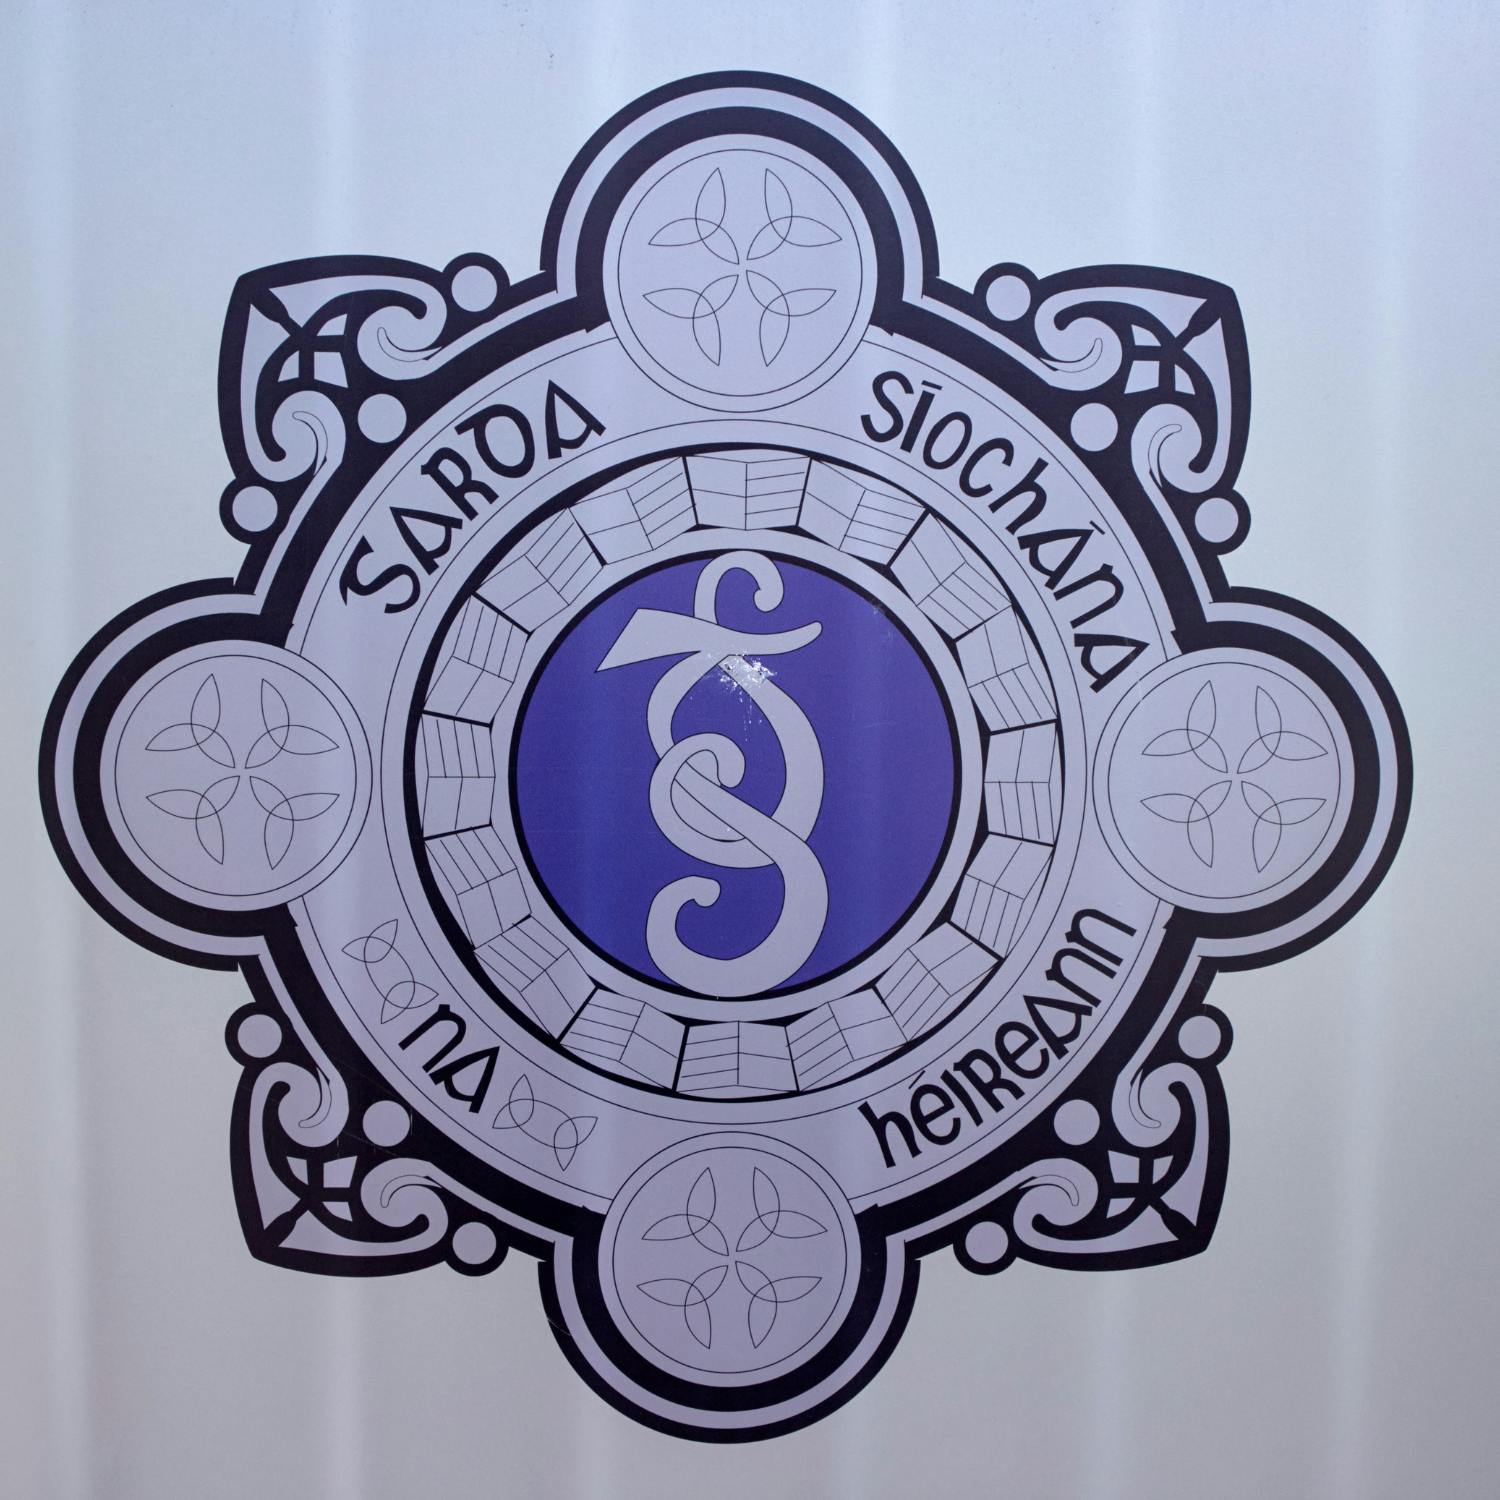 People in West Dublin live ‘in fear’ after arson and beating